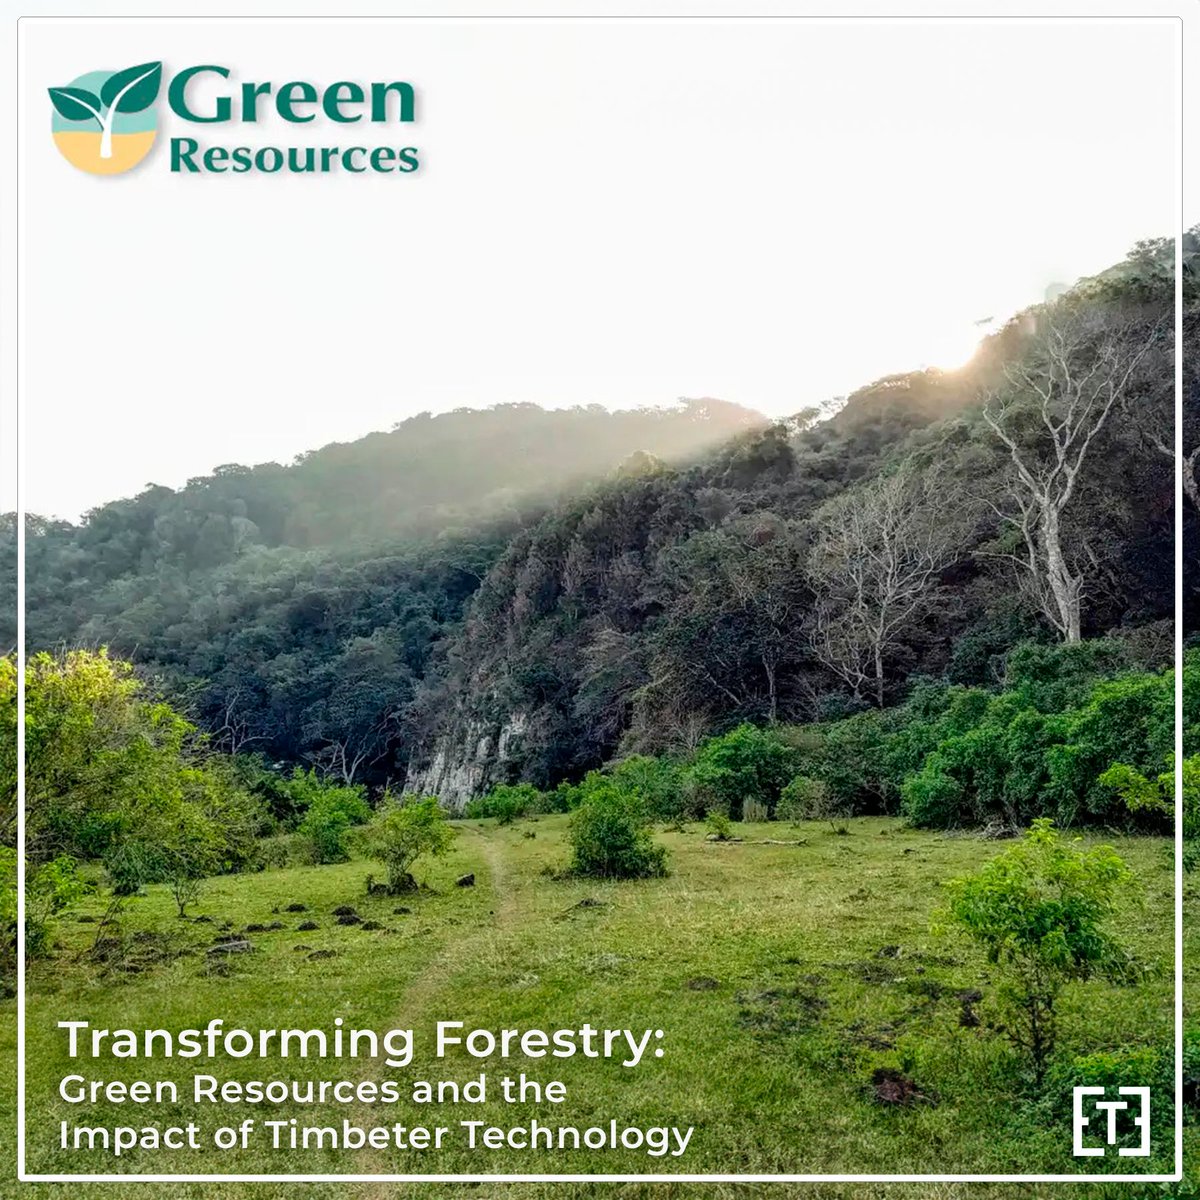 🌿Discover how @‌GreenResources, East Africa’s leading forest development and wood processing company, is revolutionizing sustainable forestry with the help of Timbeter technology.Learn how Timbeter is reshaping the forestry industry.
buff.ly/44mgCIb